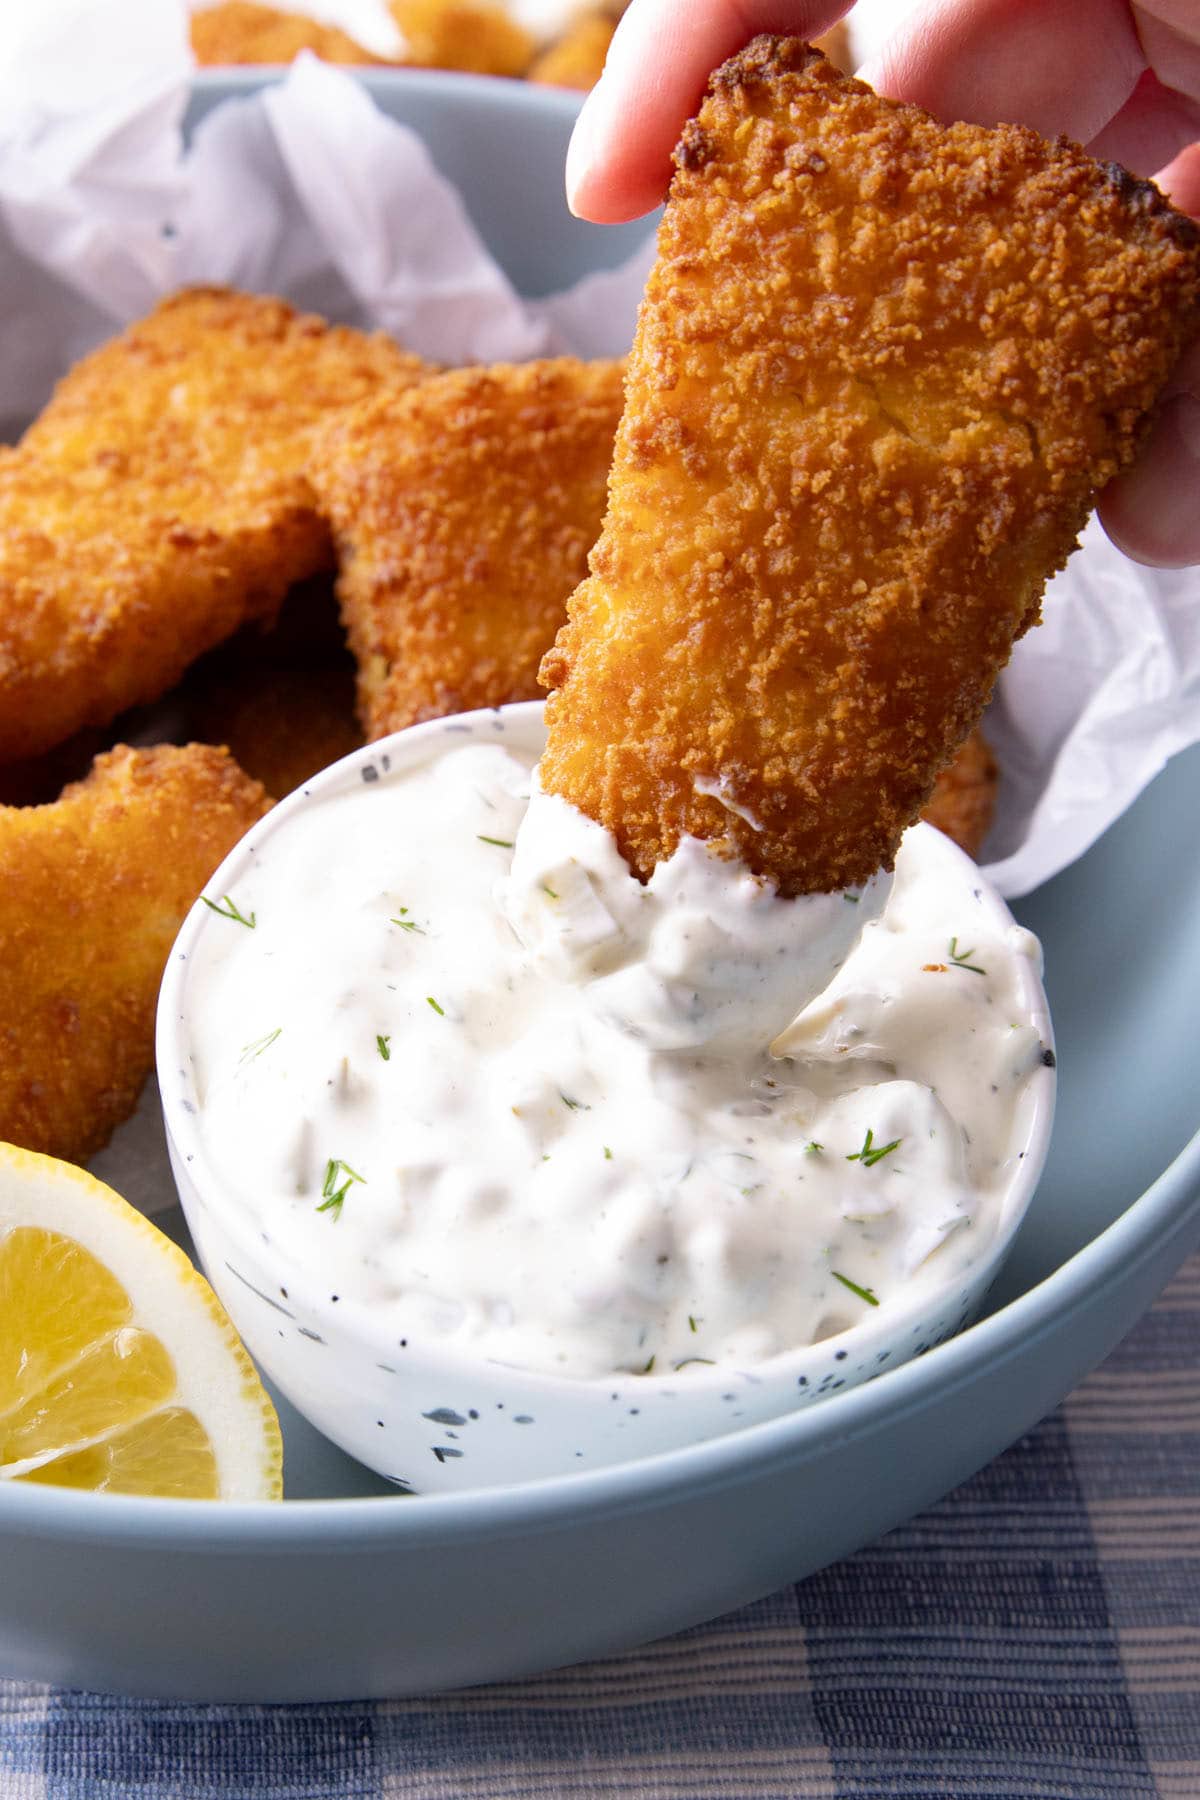 Dipping a fish stick into a bowl of creamy tartar sauce thick with chopped dill pickles and lemon juice